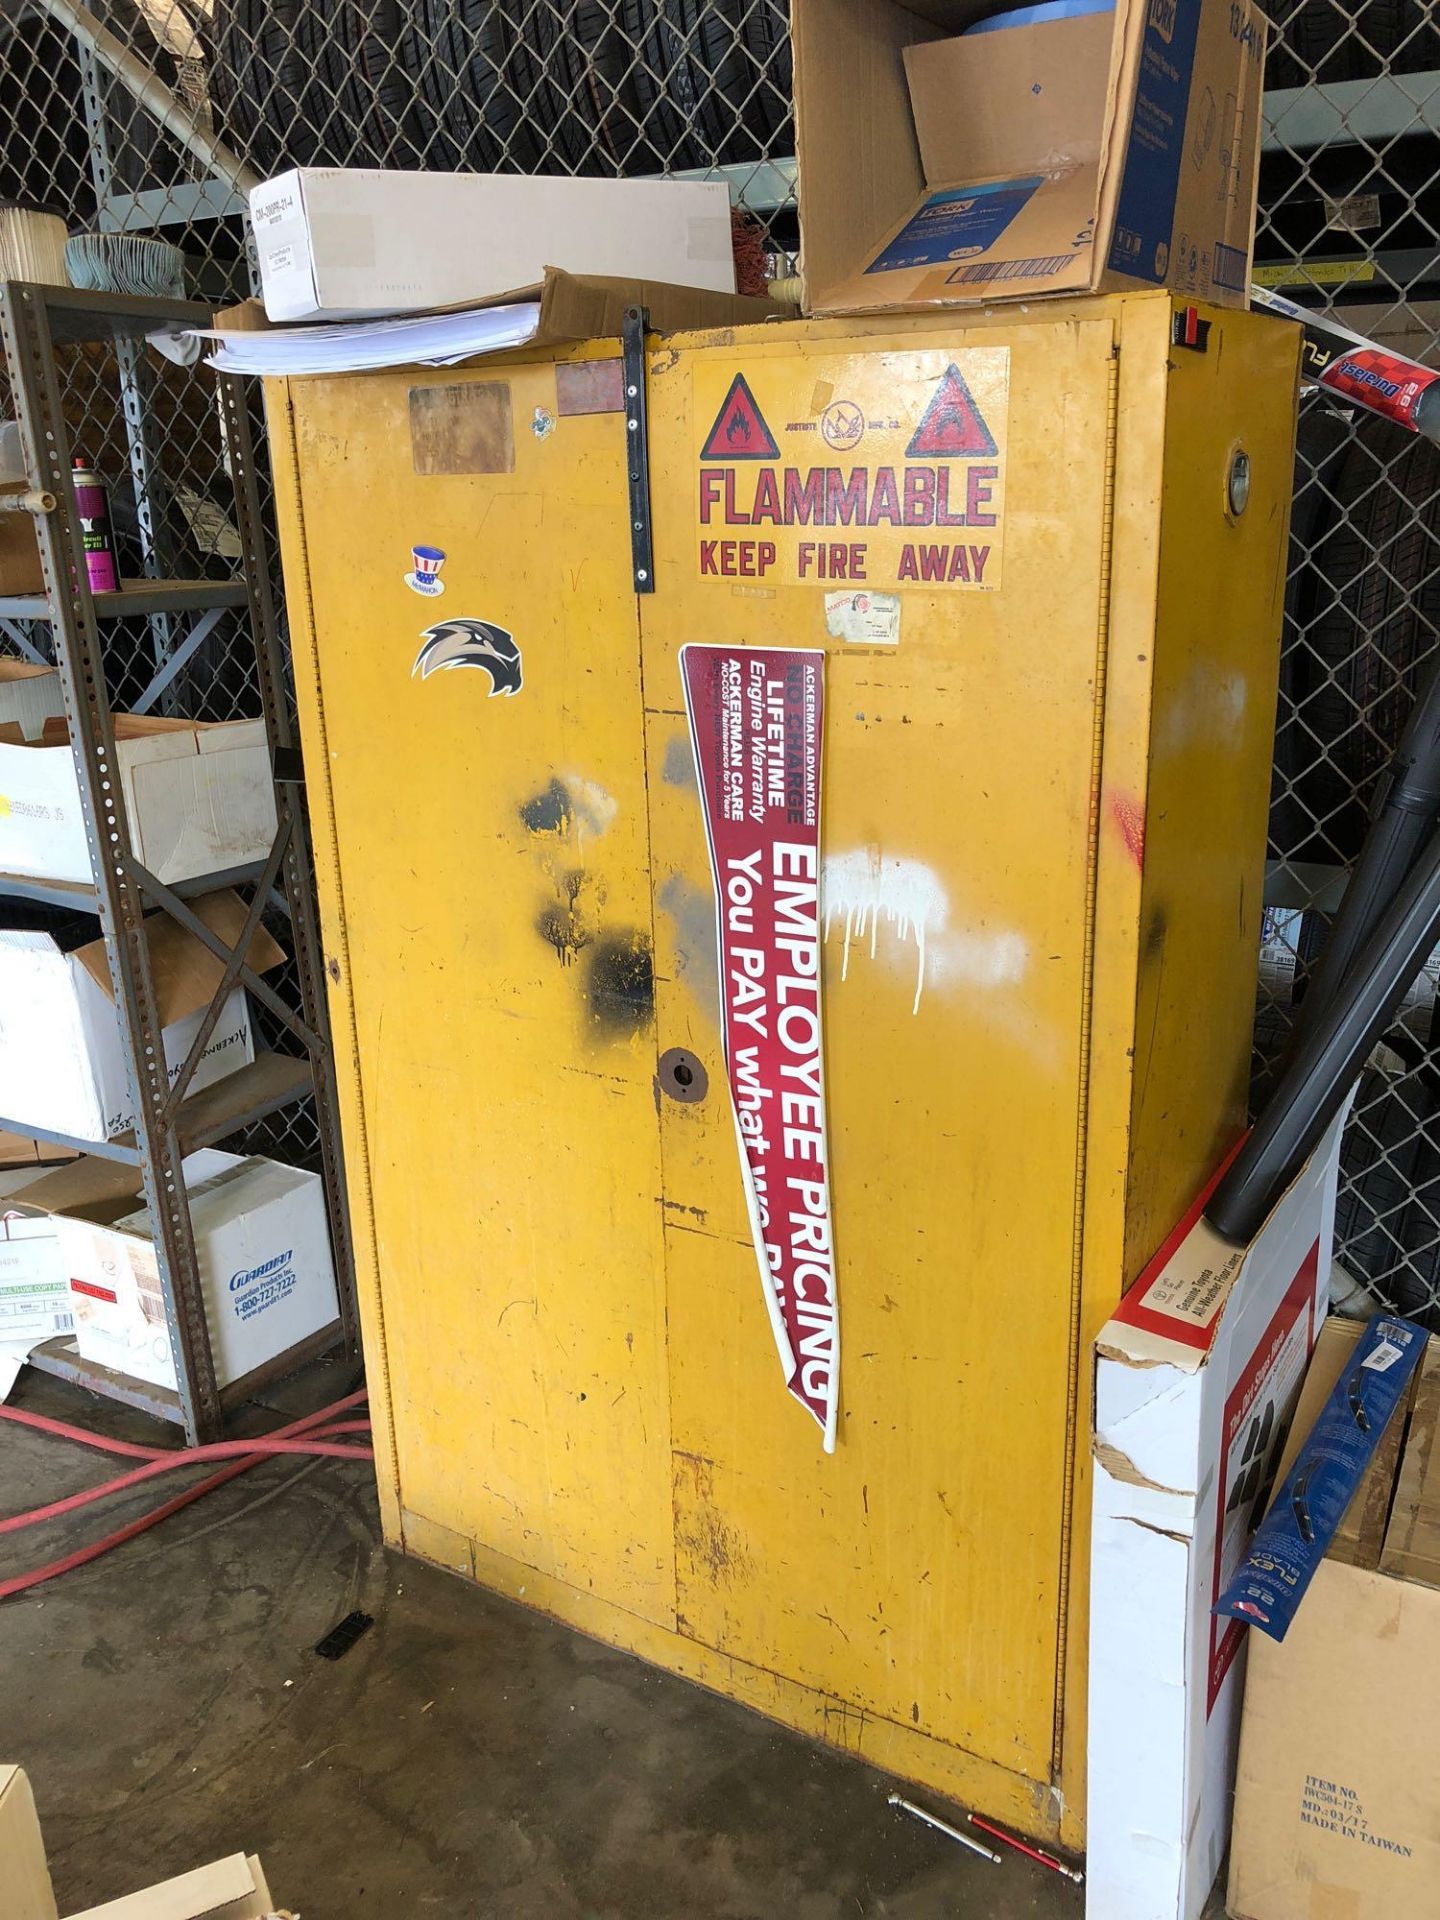 Flammable Cabinet - Image 2 of 3